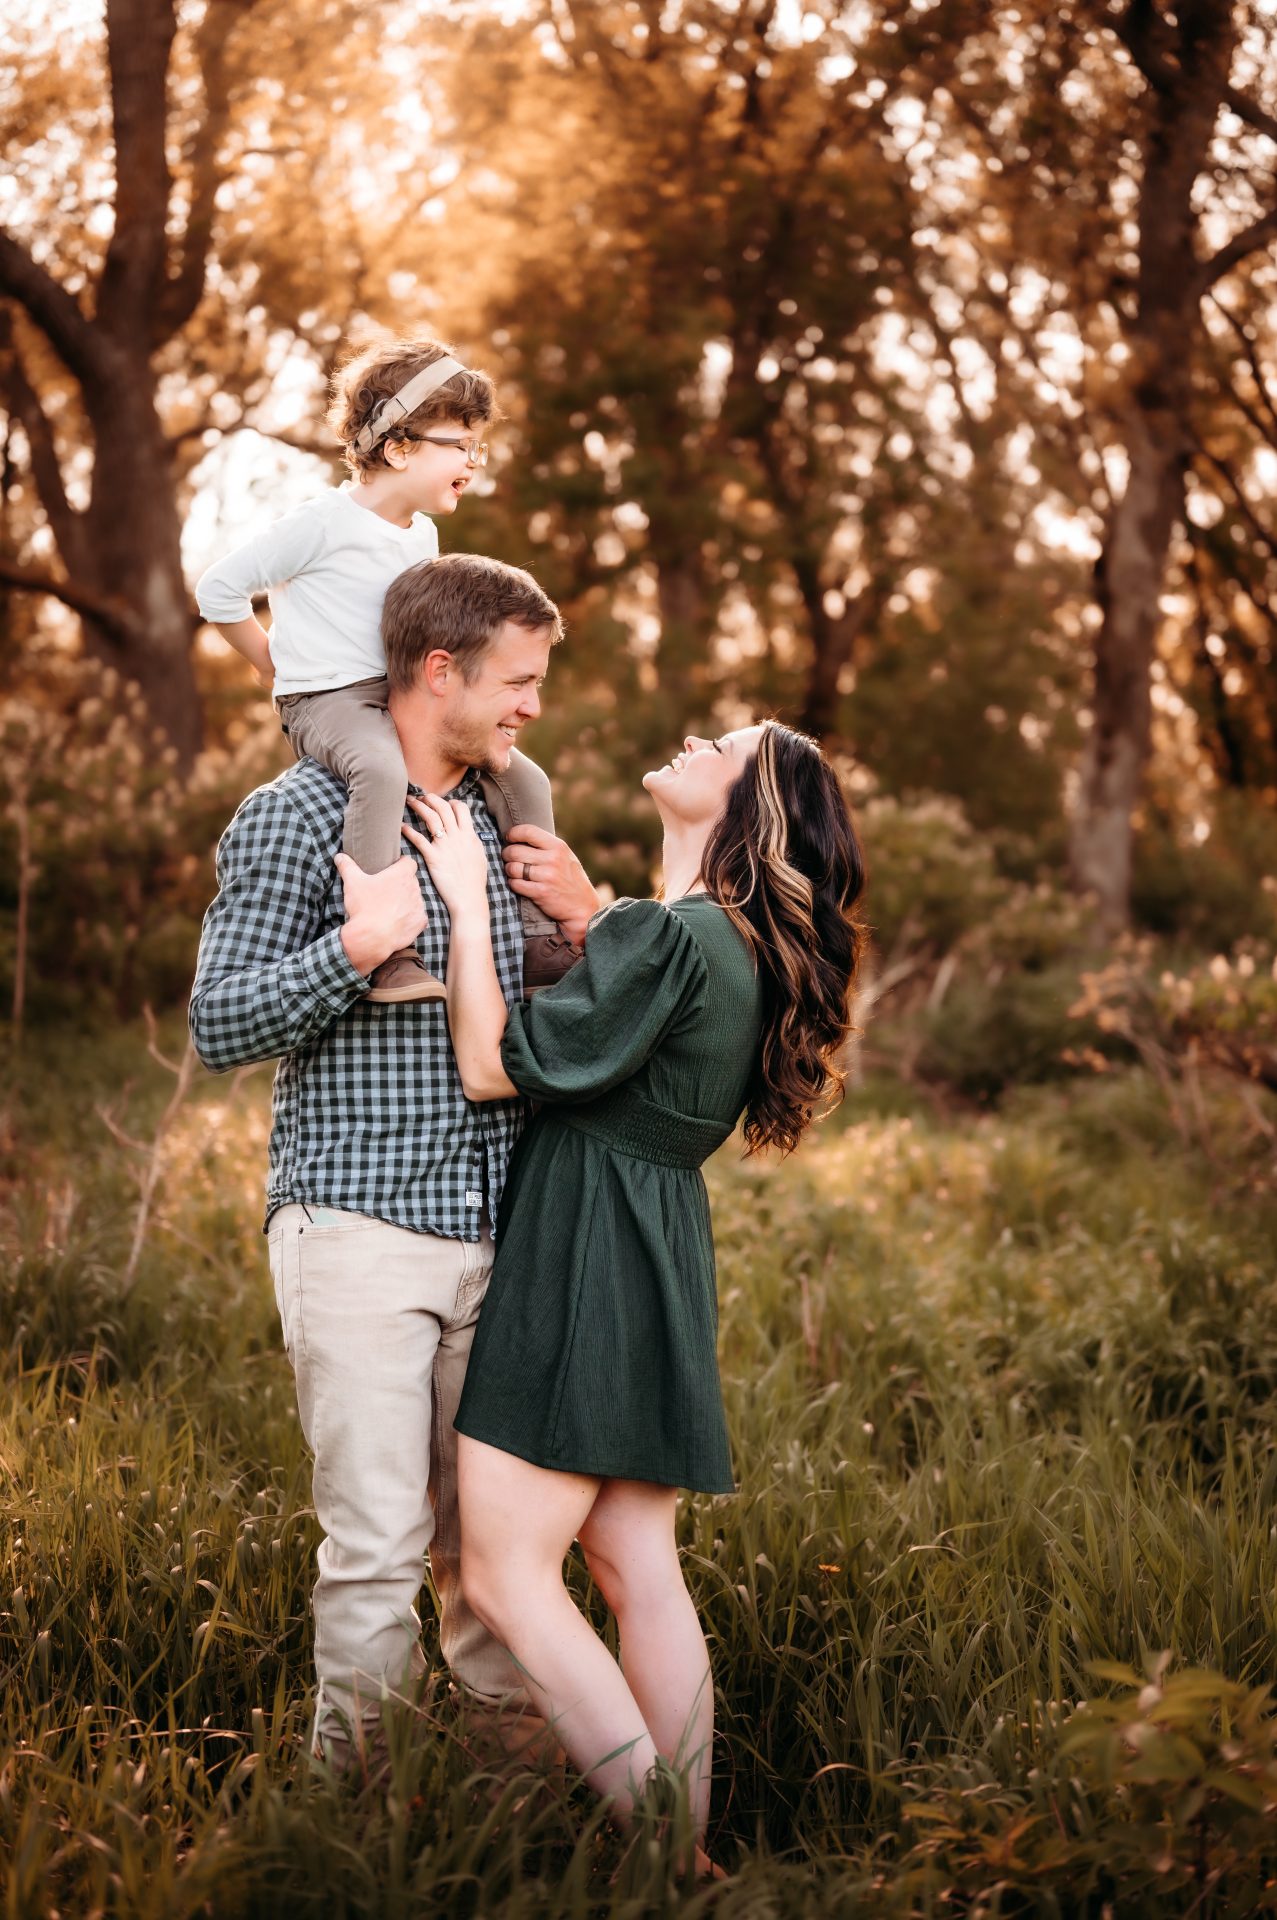 Brandon, Beth and Cooper in a grassy field. Cooper is on Brandon's shoulders. Beth is an inclusion advocate with a focus on raising a deaf child.